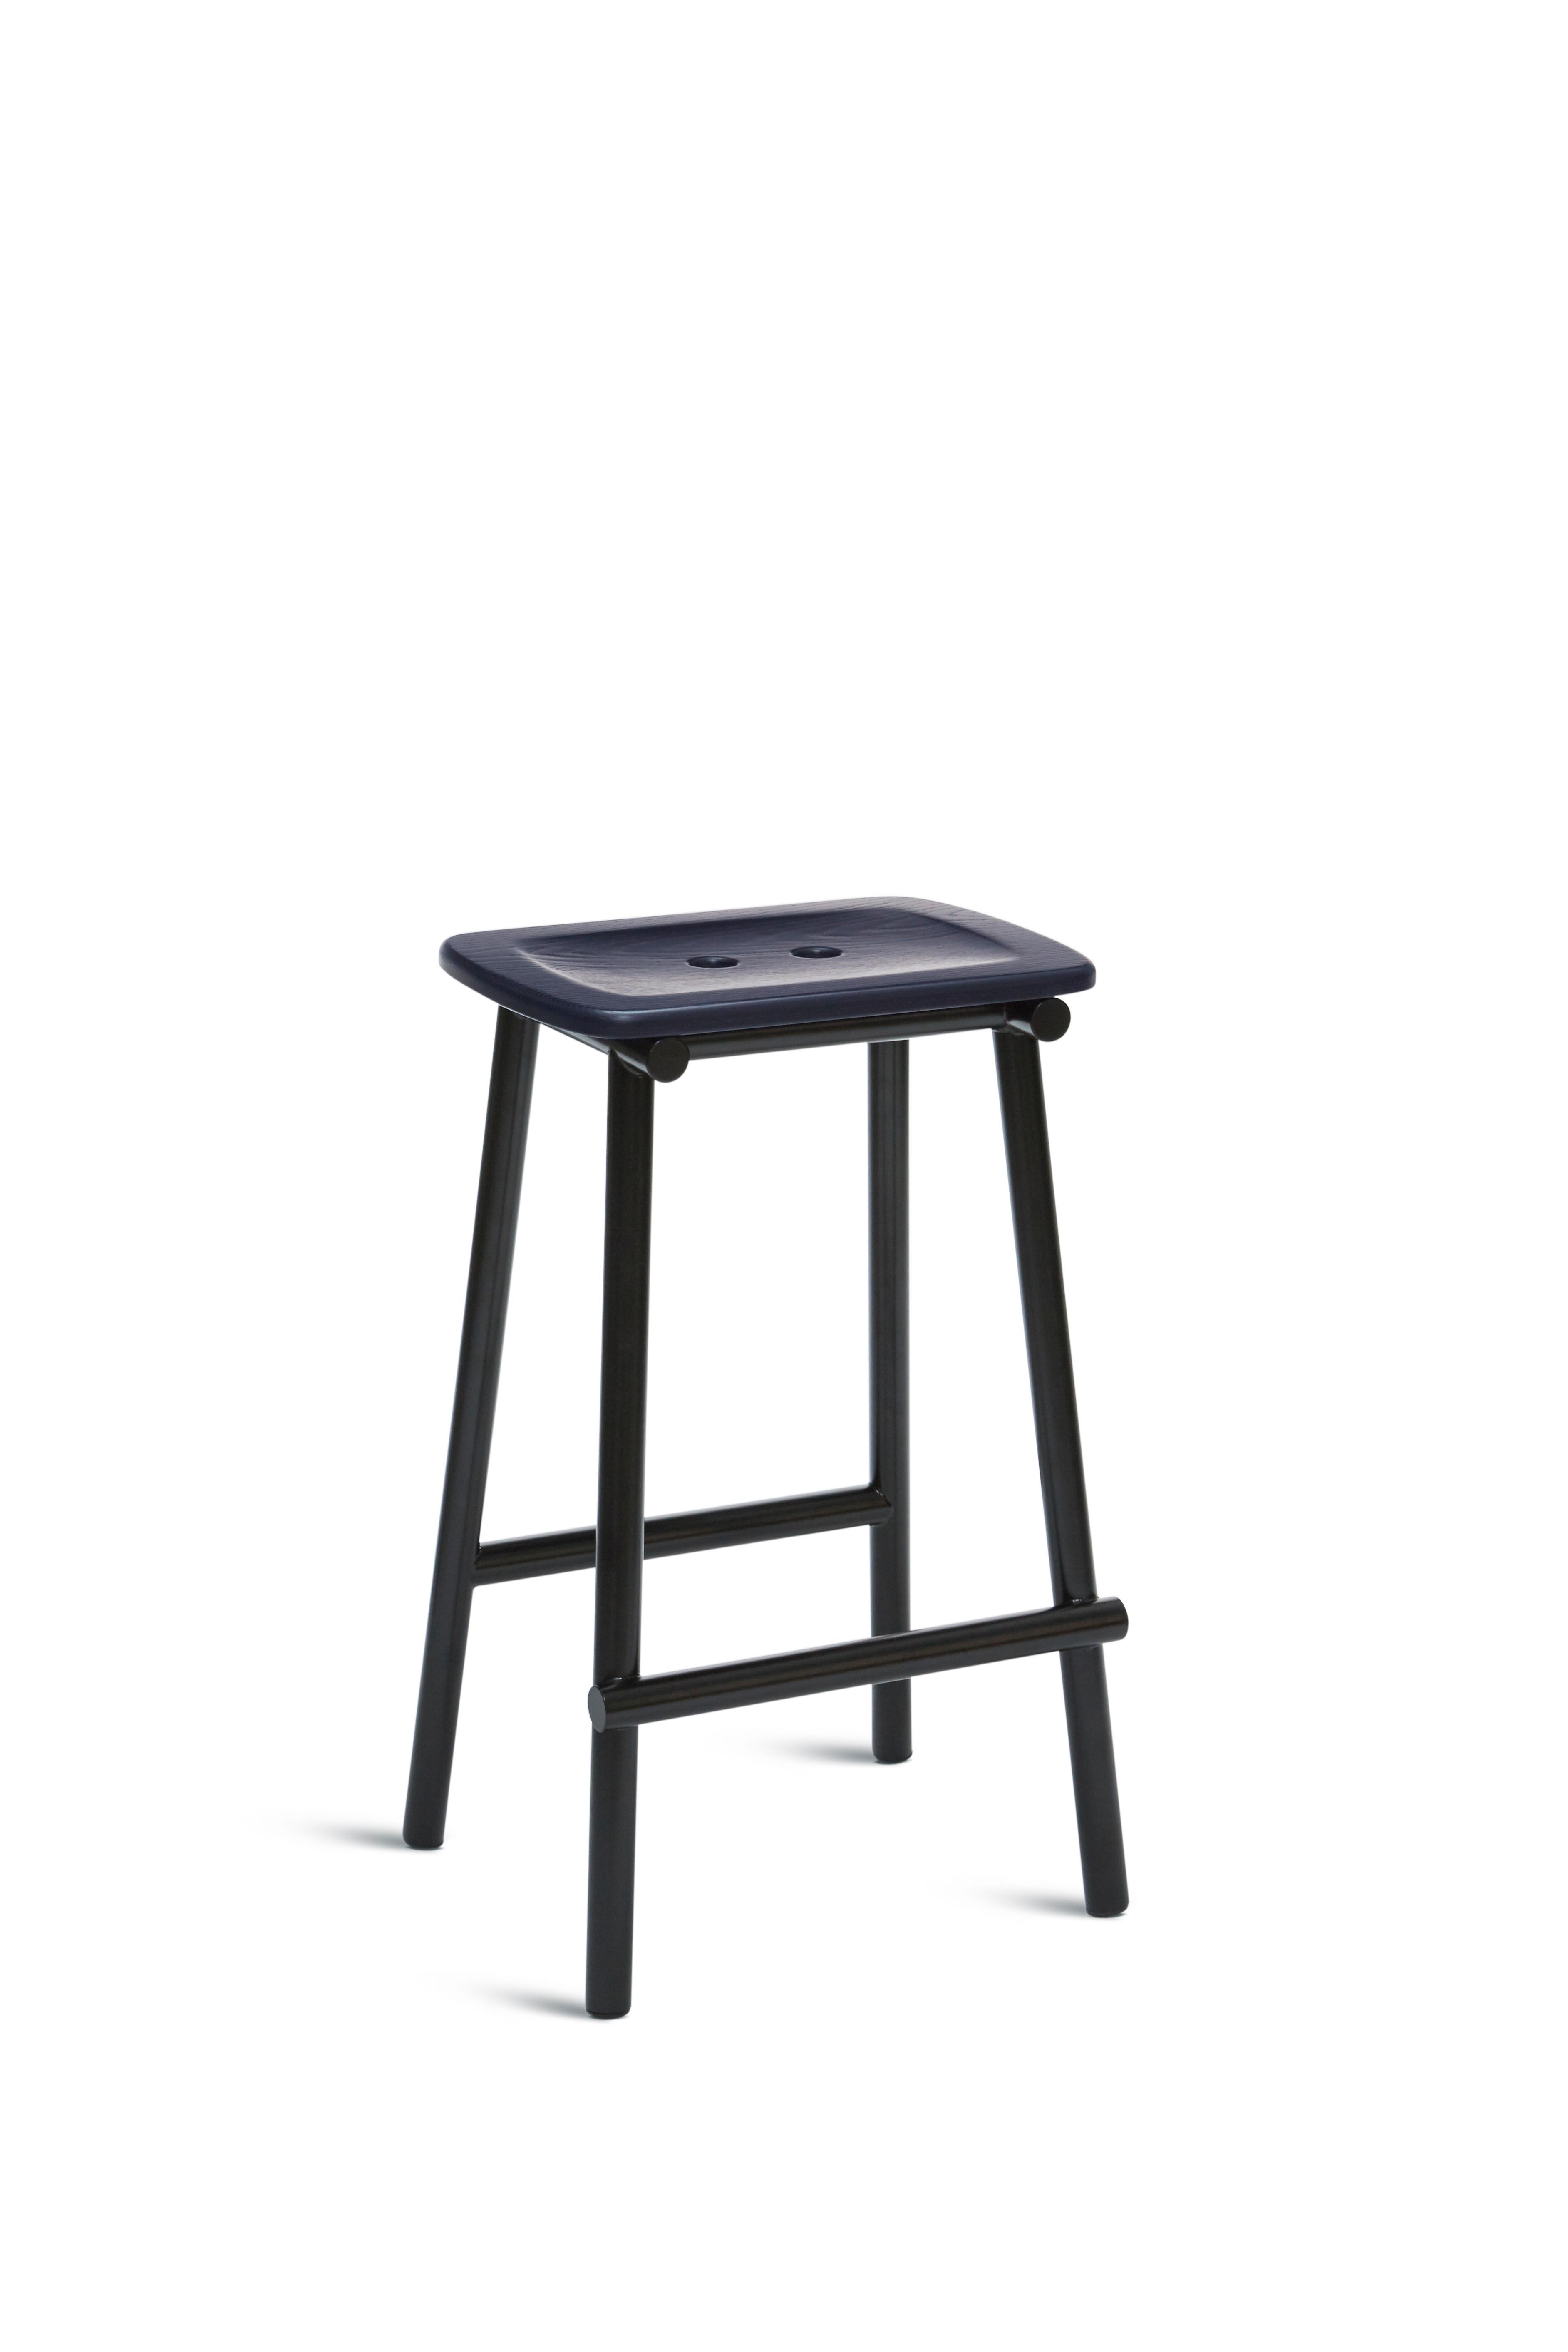 For Sale: Blue (Painted Navy Blue) Tubby Tube Counter Stool with Wooden Seat by Faye Toogood